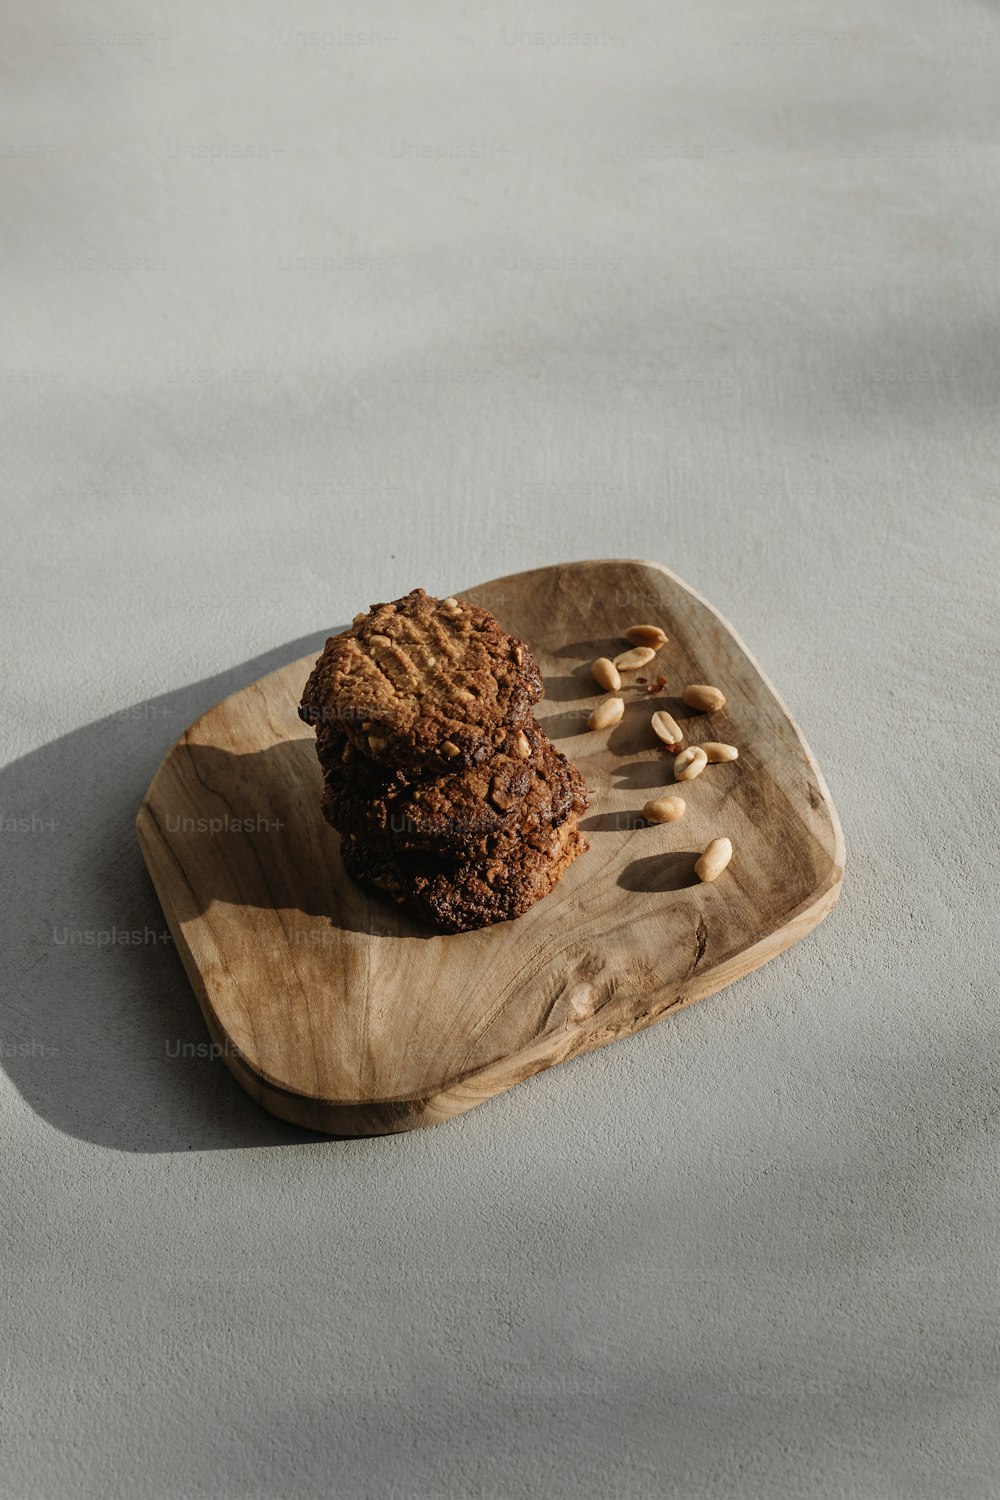 a cookie on a wooden plate with nuts